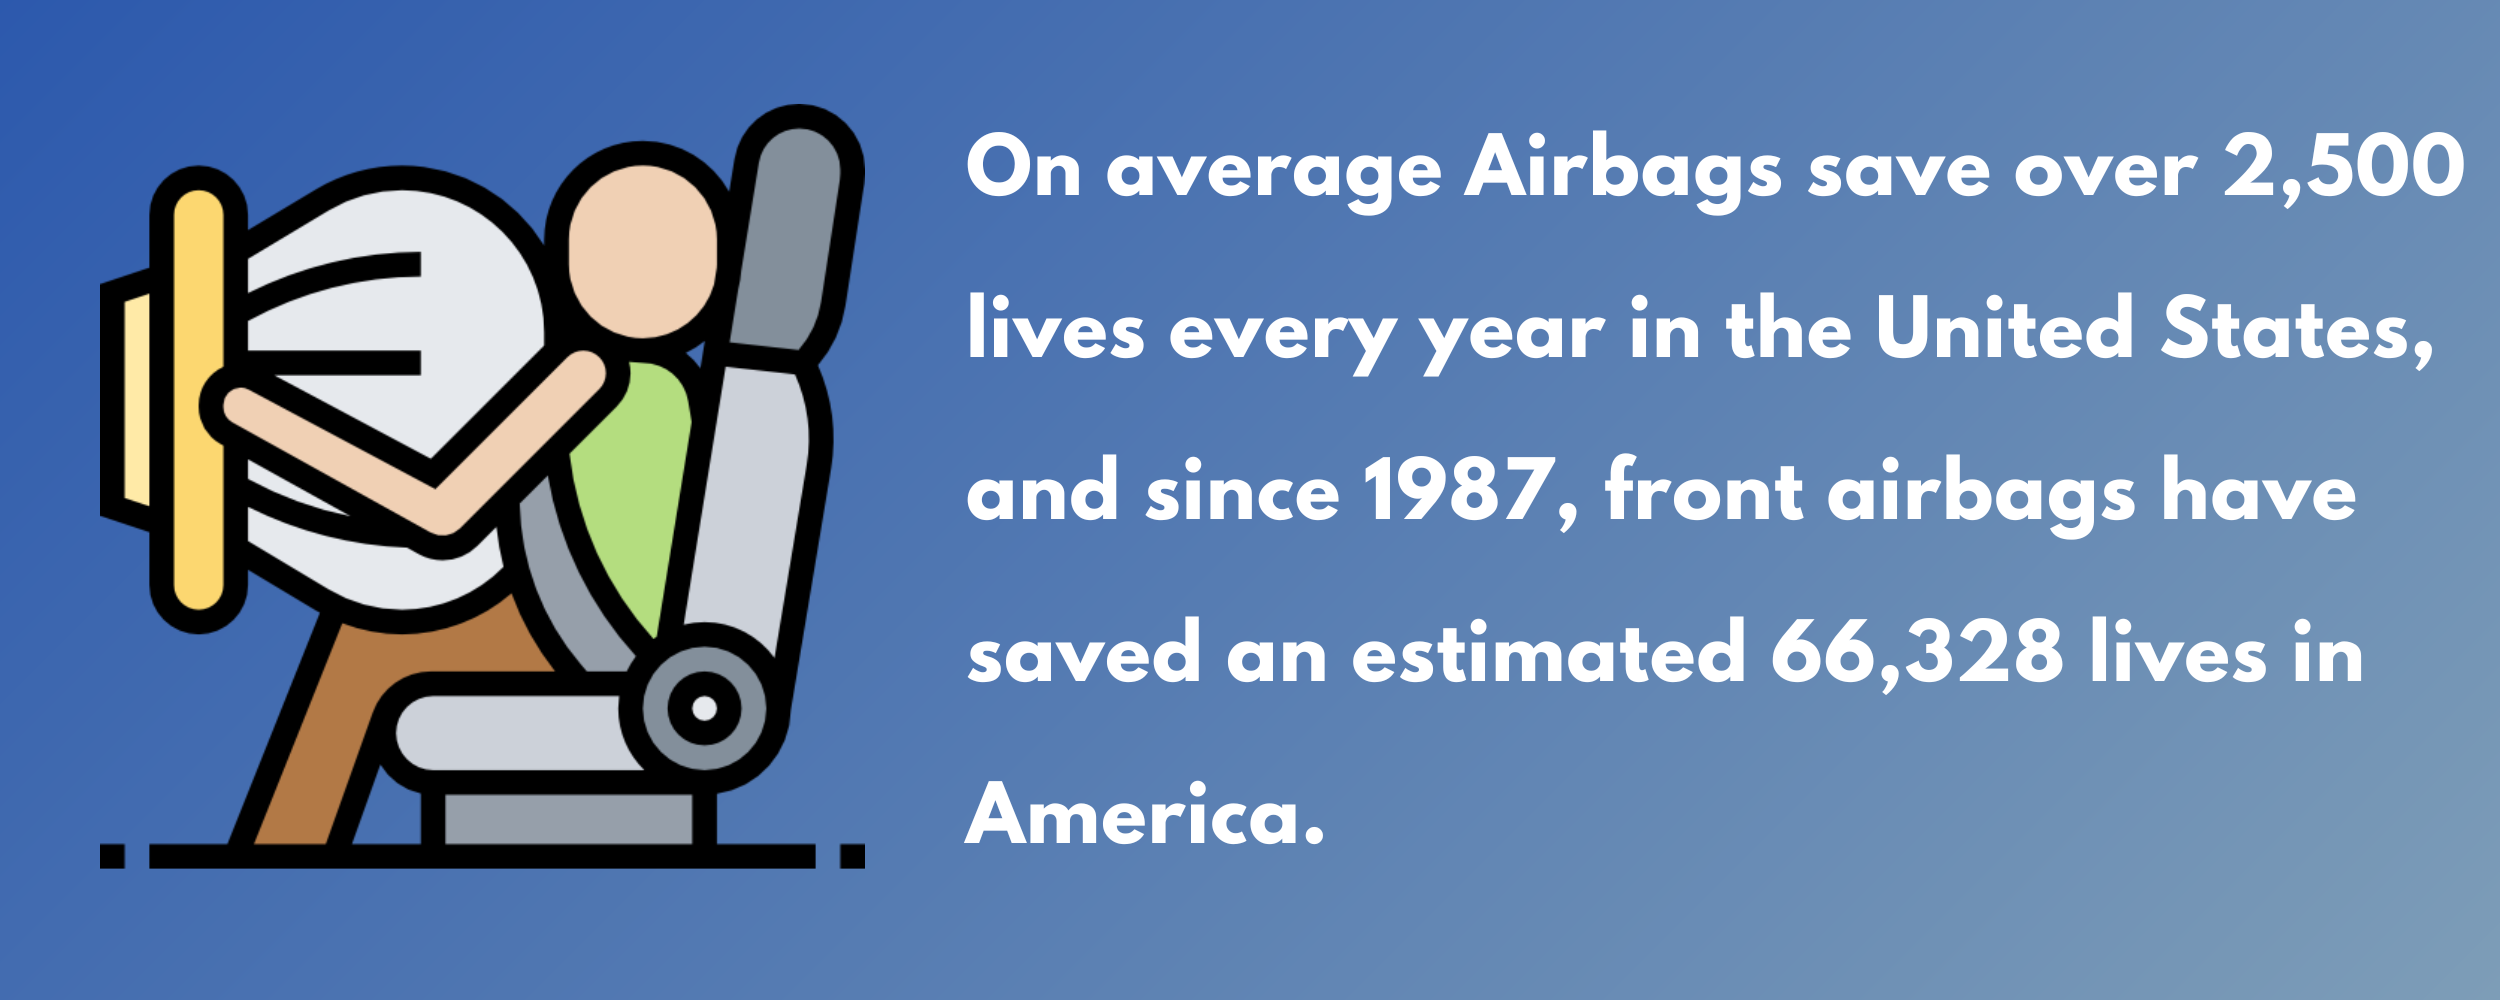 how many lives airbags have saved